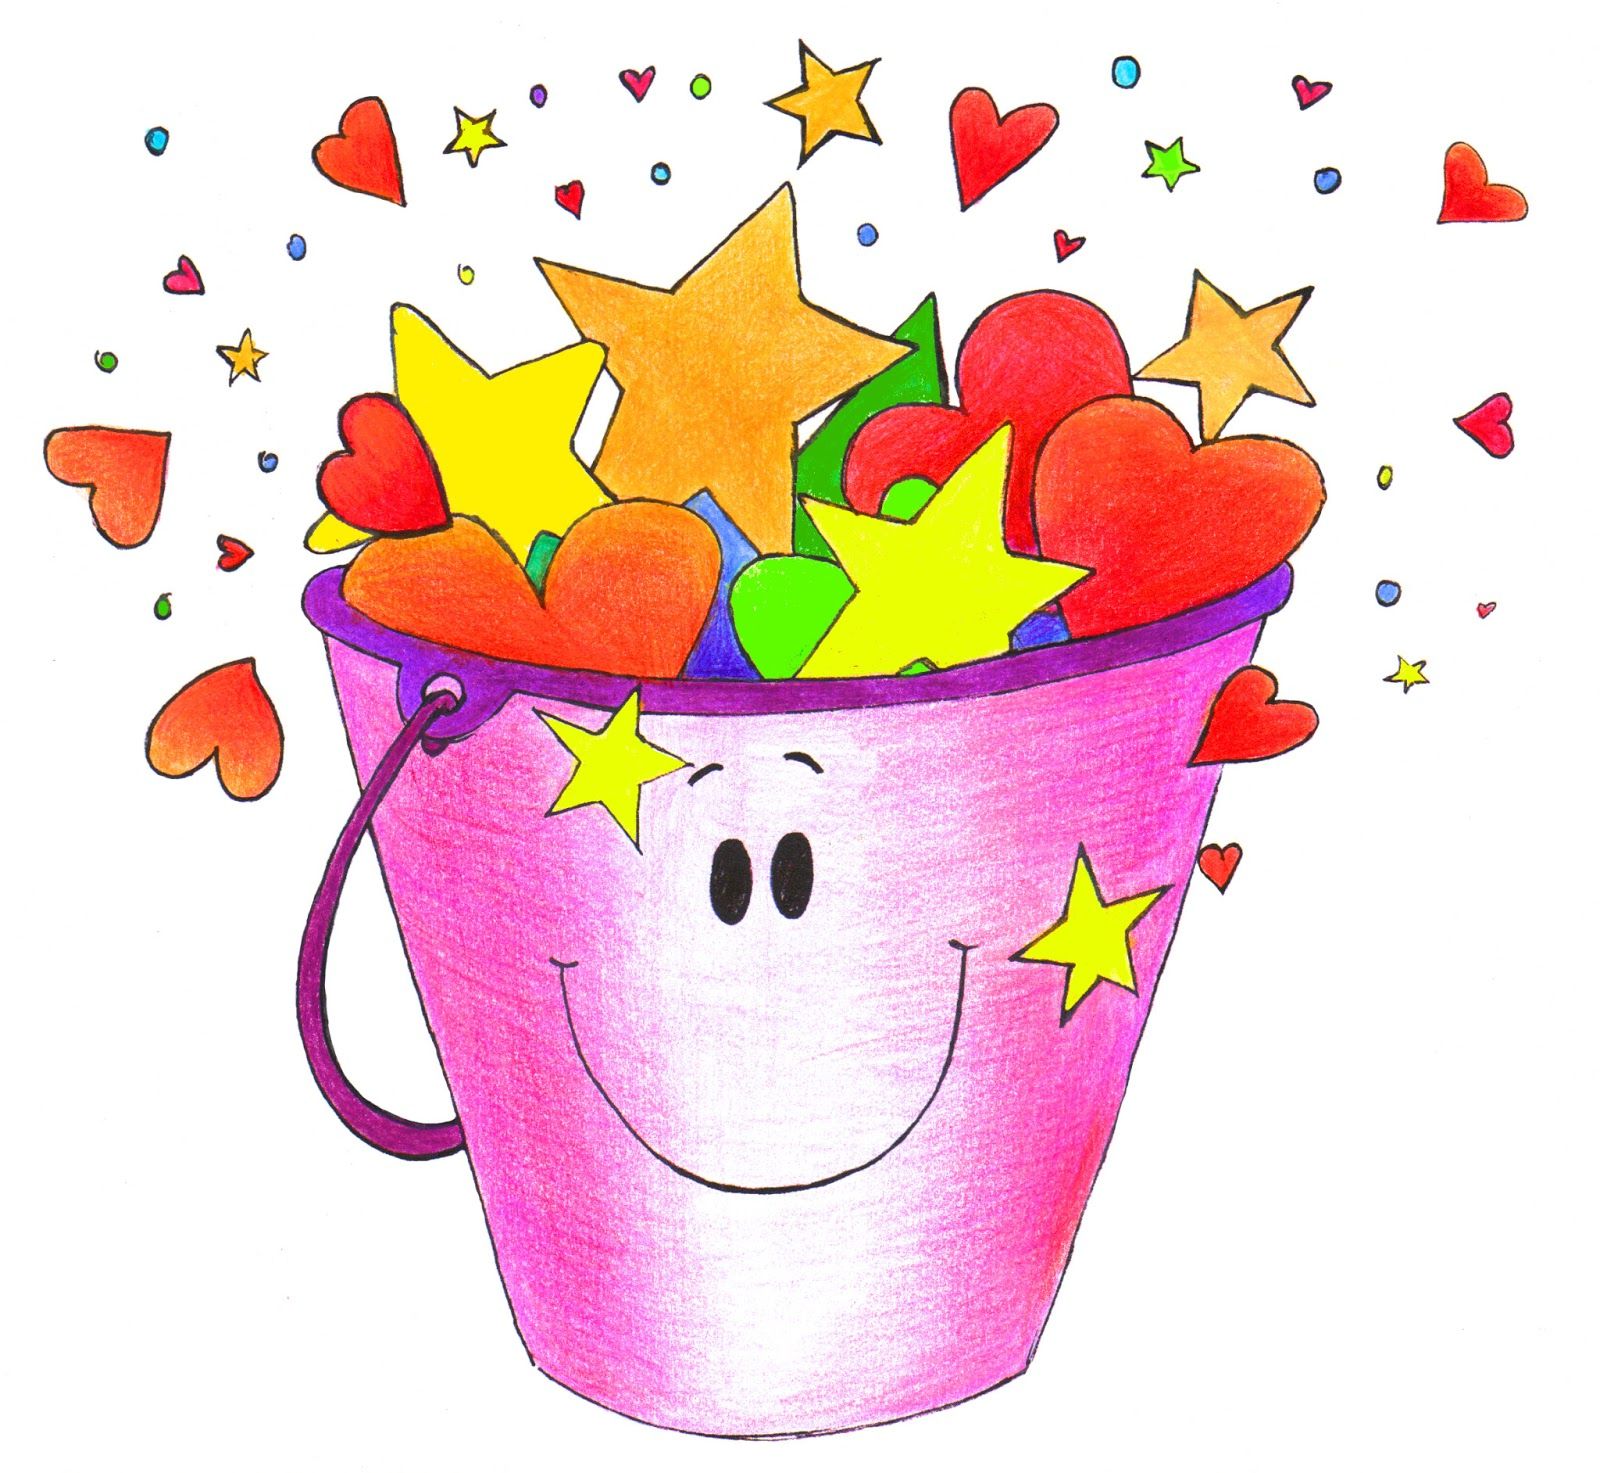 bucket clipart prize